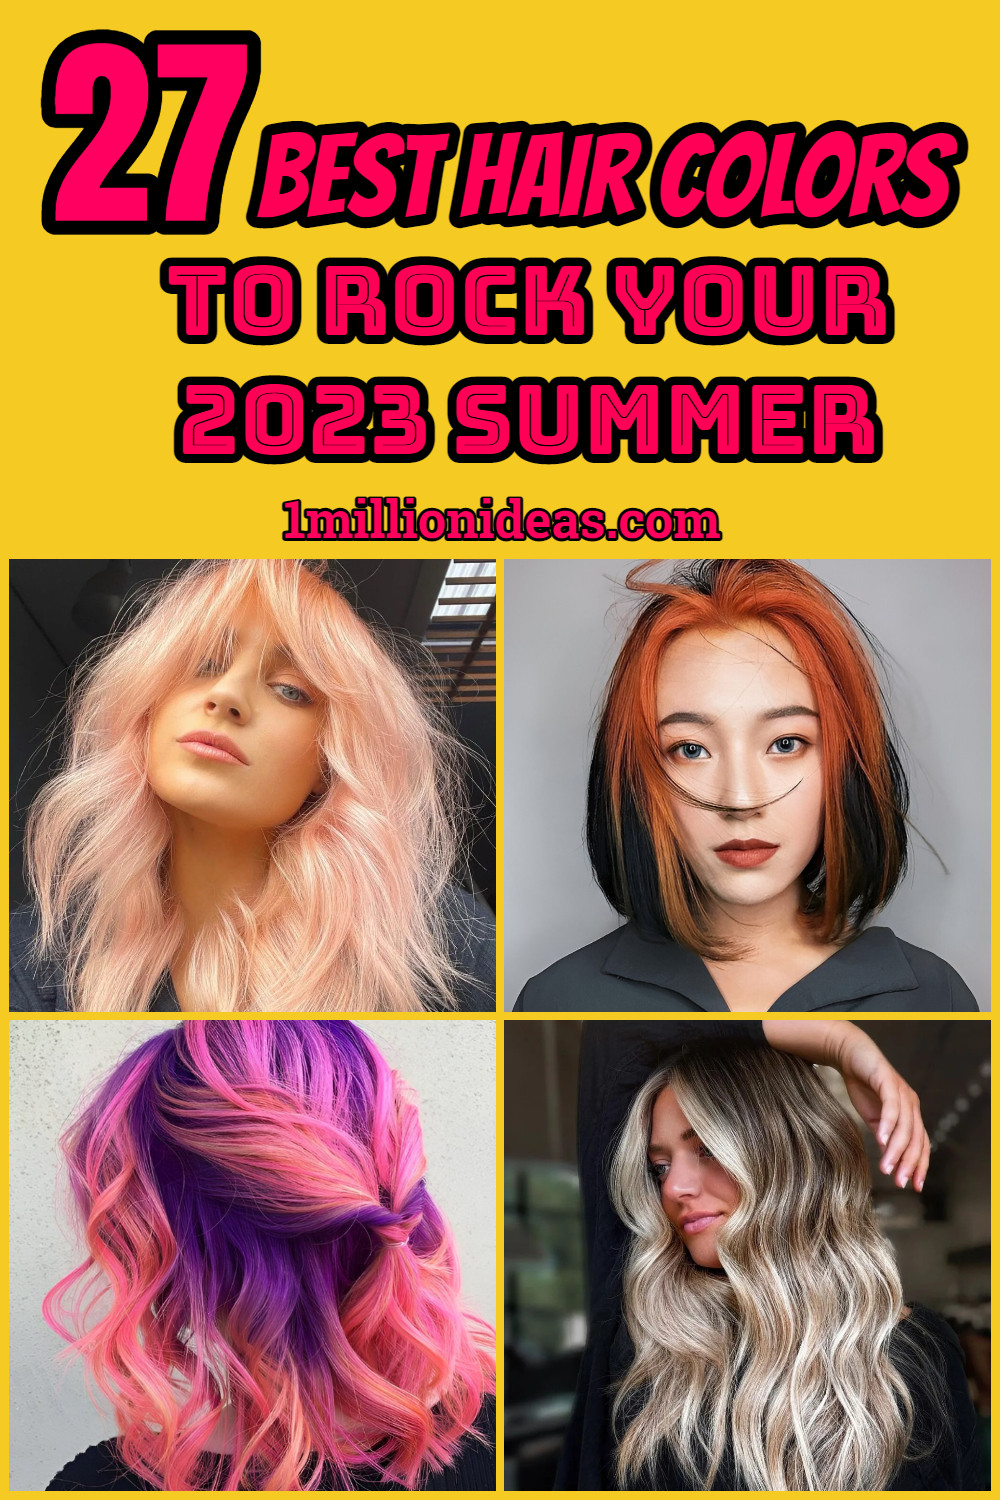 27 Best Hair Colors To Rock Your 2023 Summer - 173